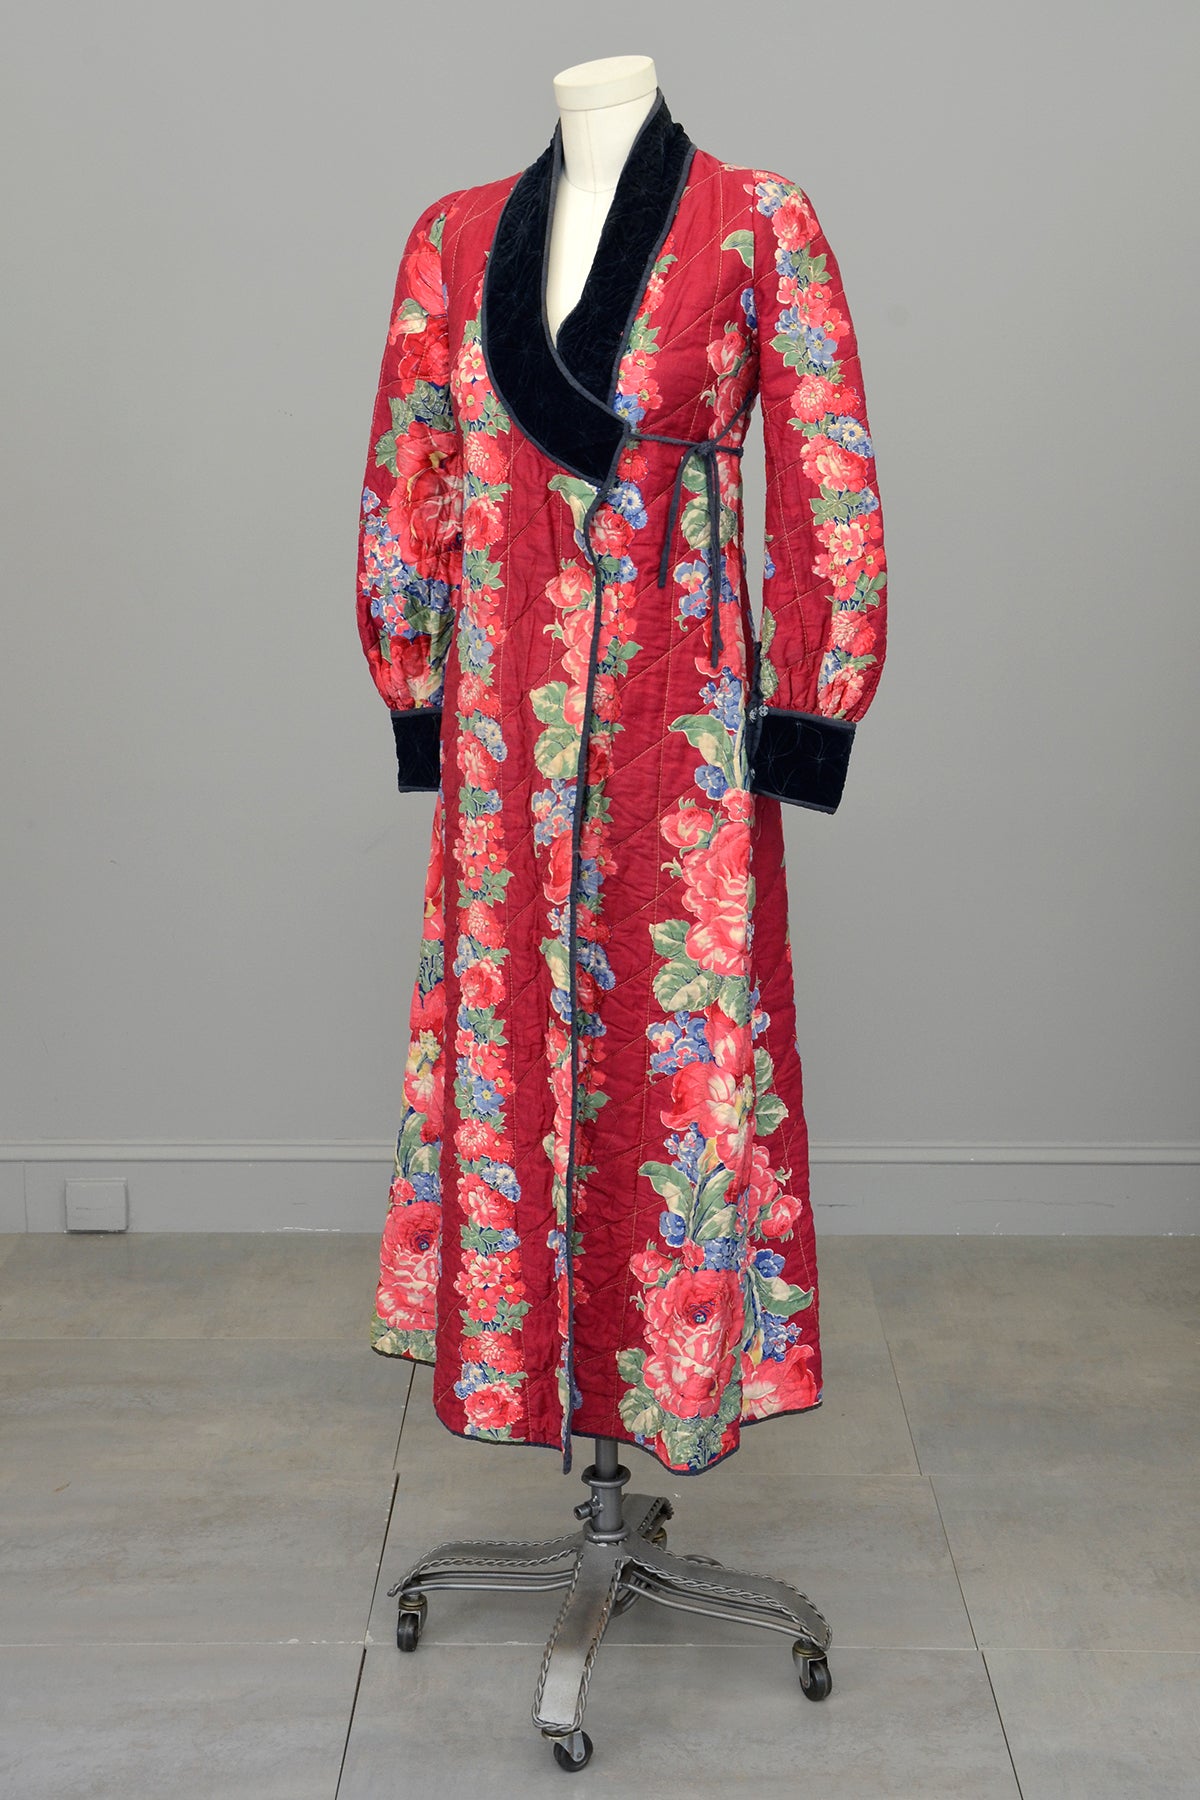 1930s Cranberry Rose Print Quilted House Coat Robe | VintageVirtuosa